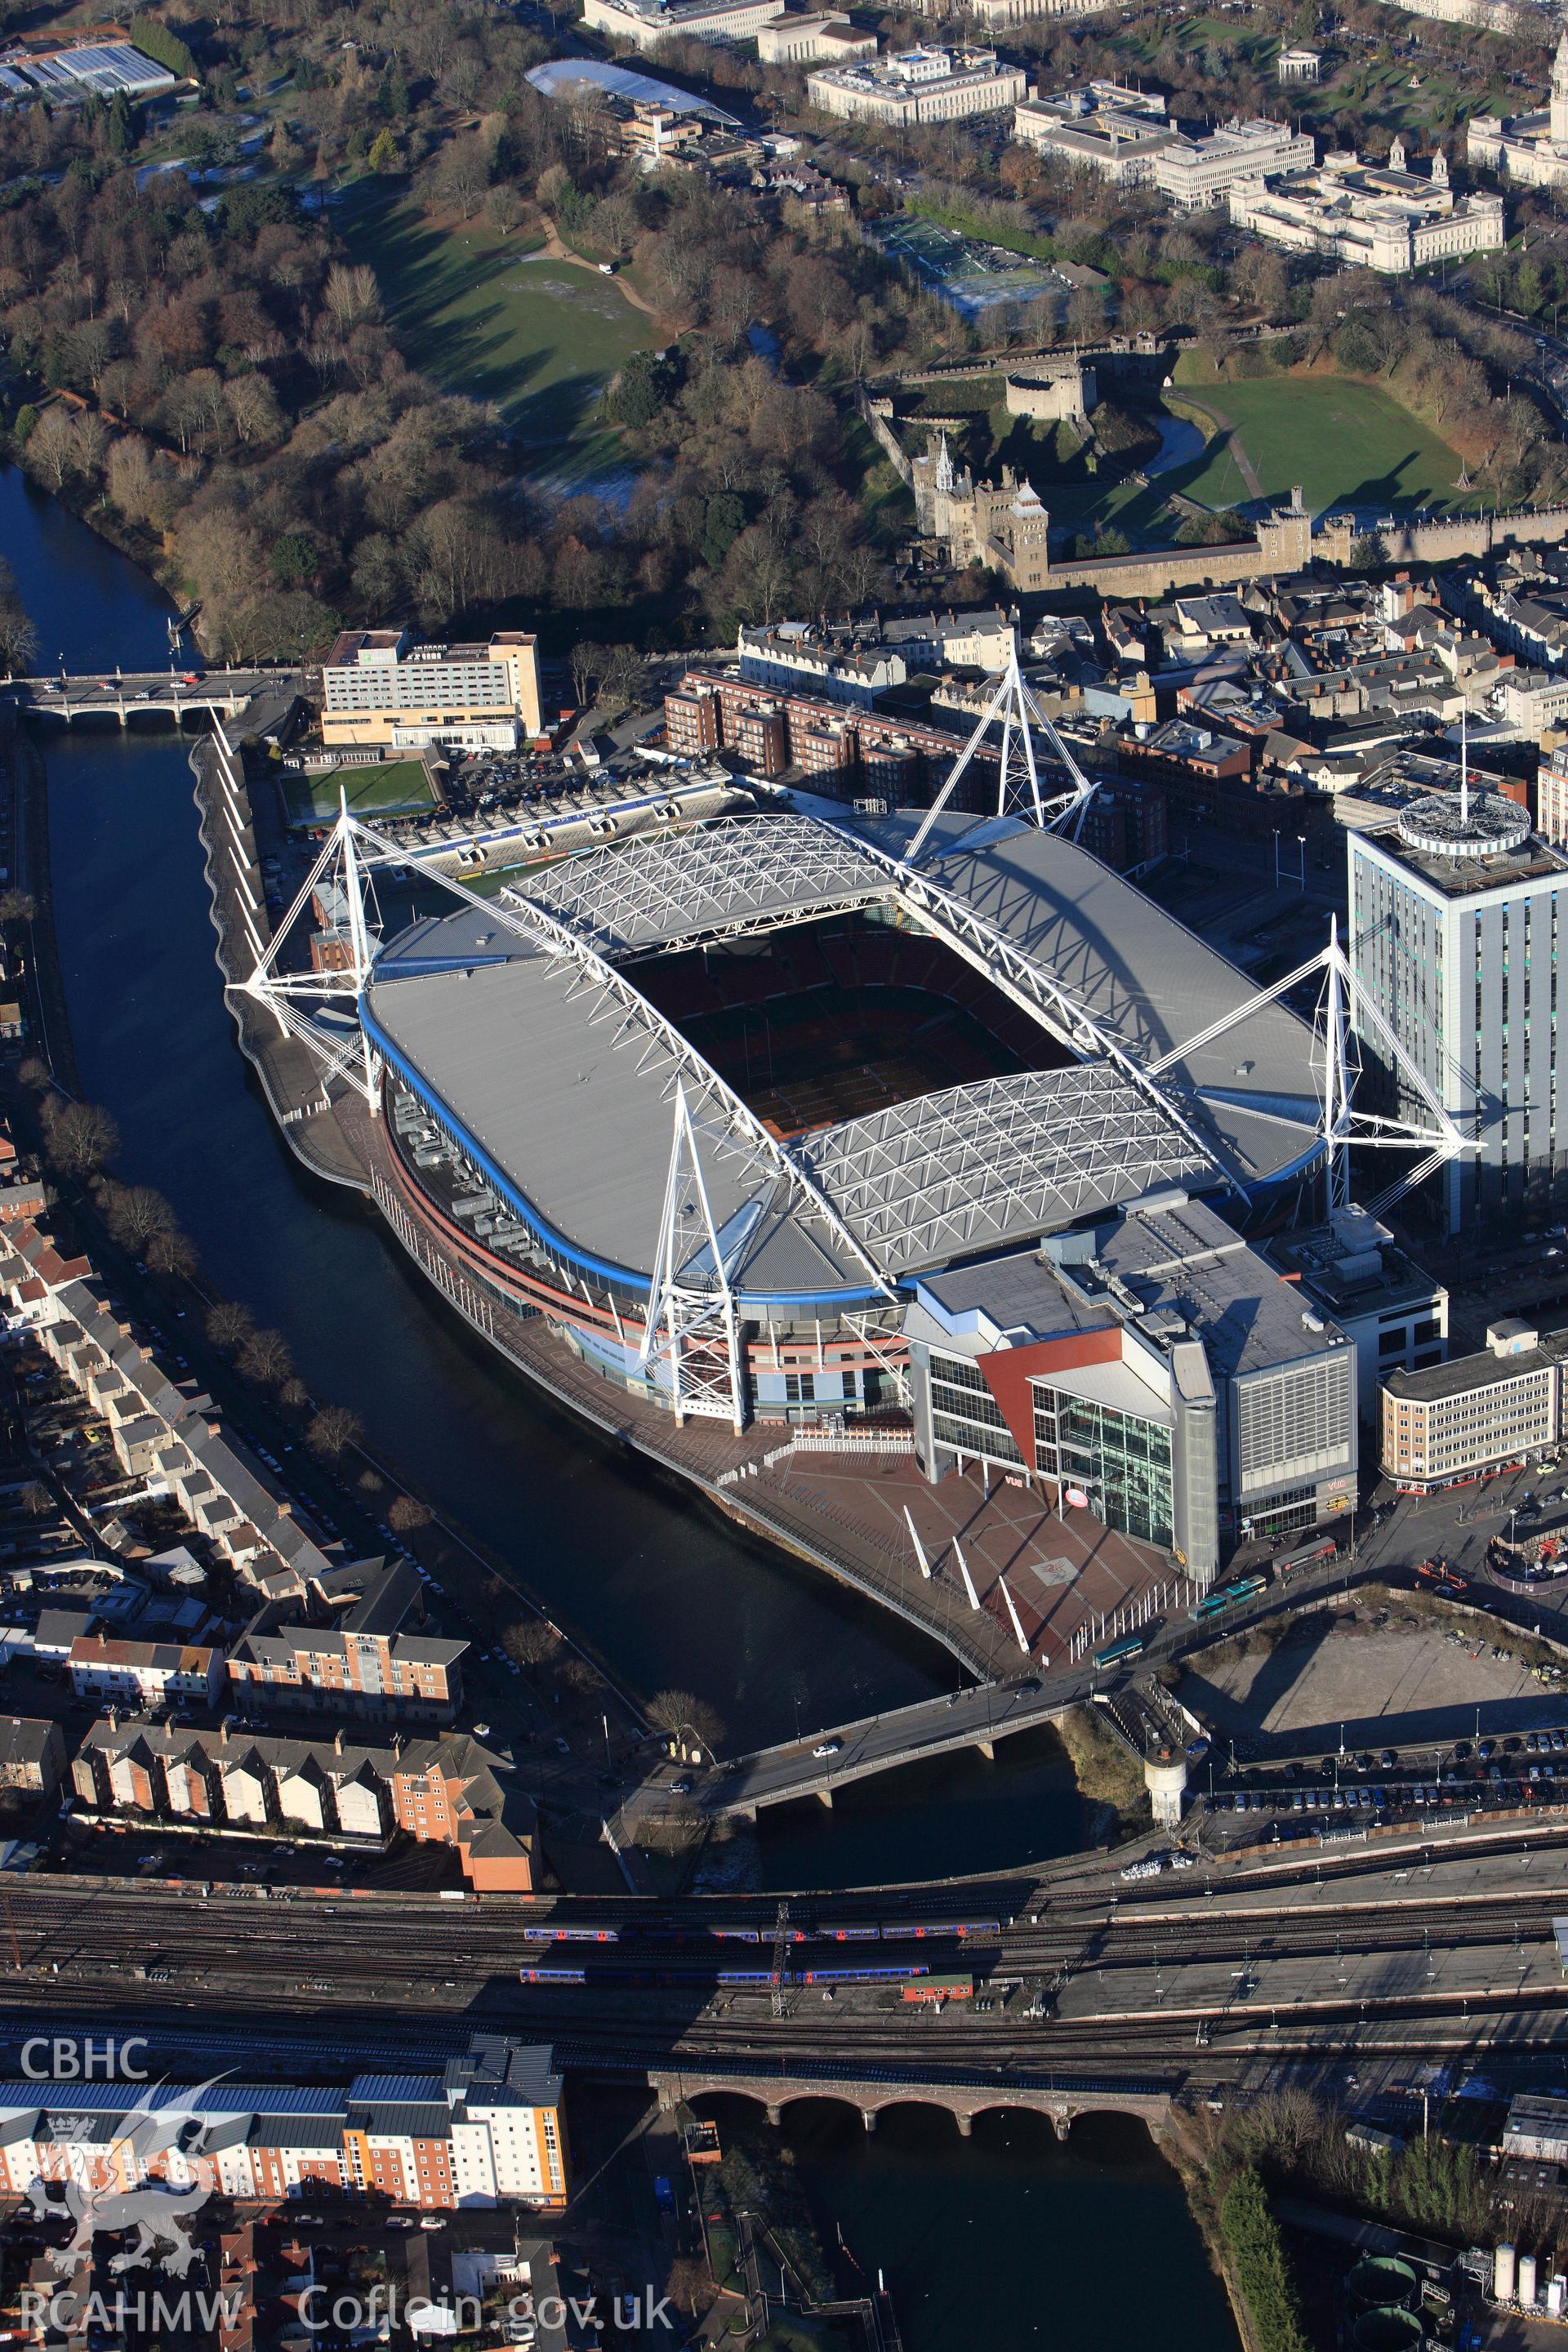 RCAHMW colour oblique photograph of Cardiff Millenium Stadium. Taken by Toby Driver on 08/12/2010.